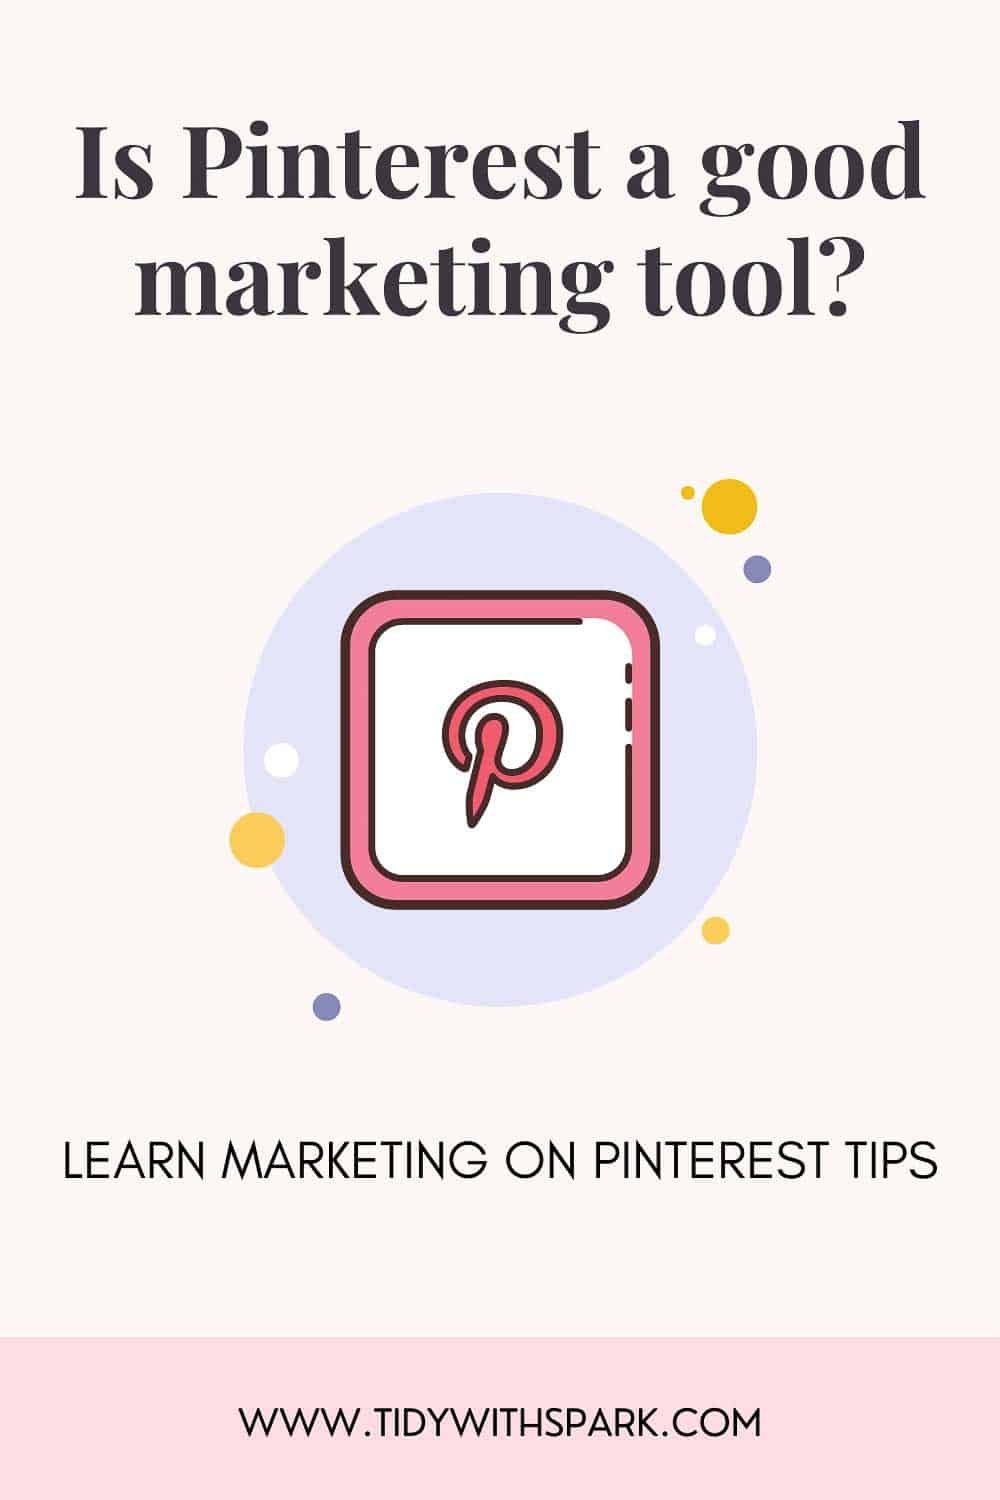 Promotional image for Marketing on Pinterest Tips for tidy with spark blog